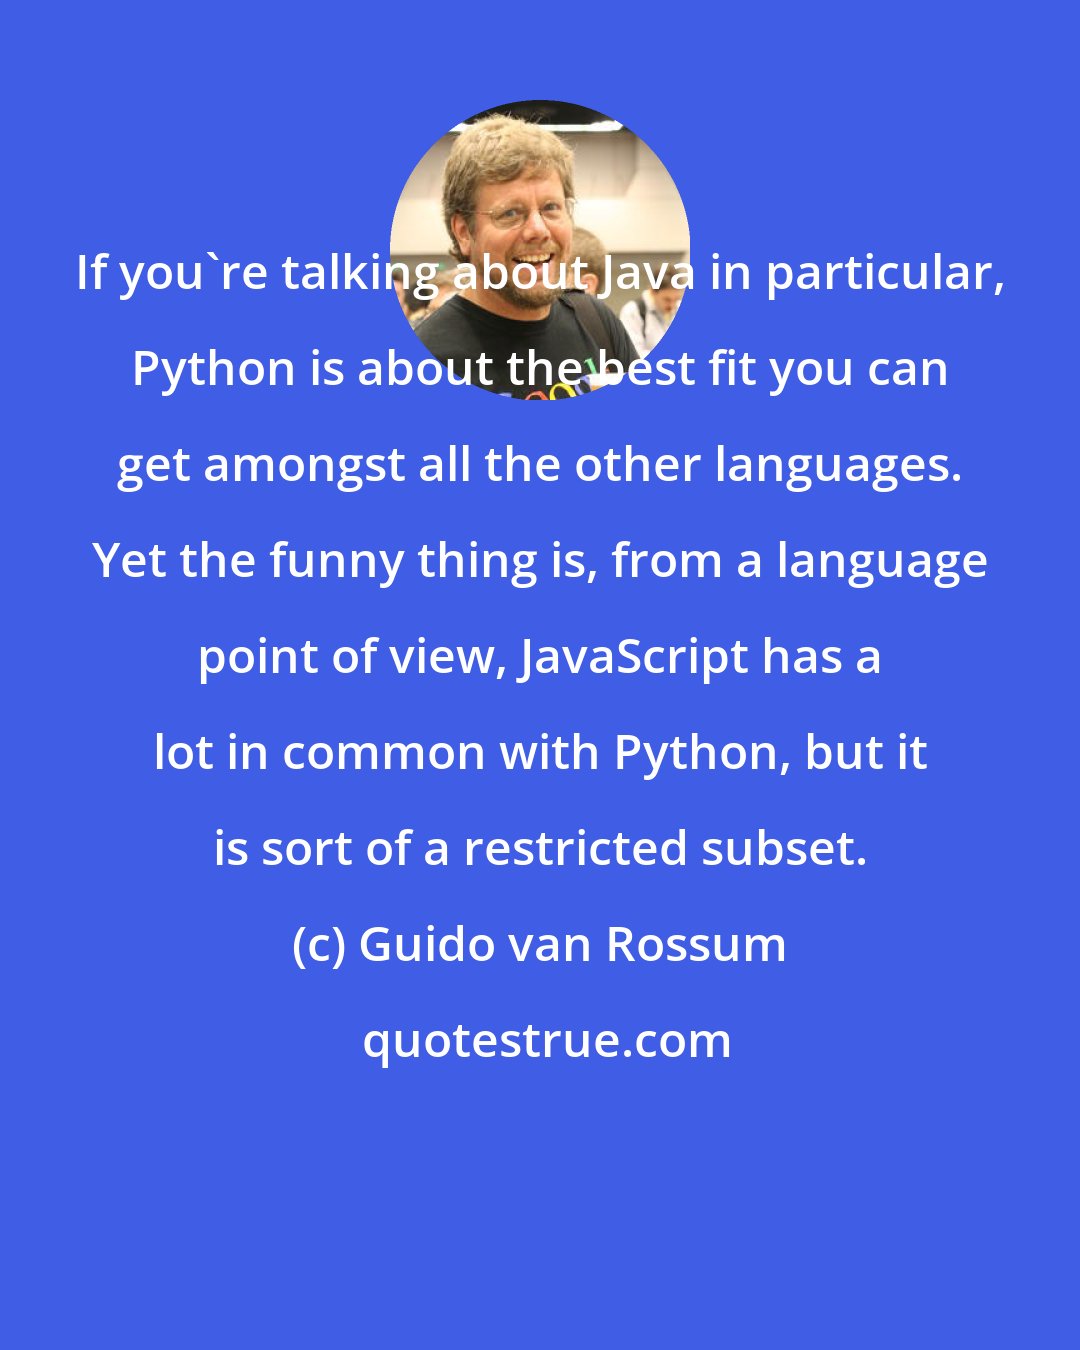 Guido van Rossum: If you're talking about Java in particular, Python is about the best fit you can get amongst all the other languages. Yet the funny thing is, from a language point of view, JavaScript has a lot in common with Python, but it is sort of a restricted subset.